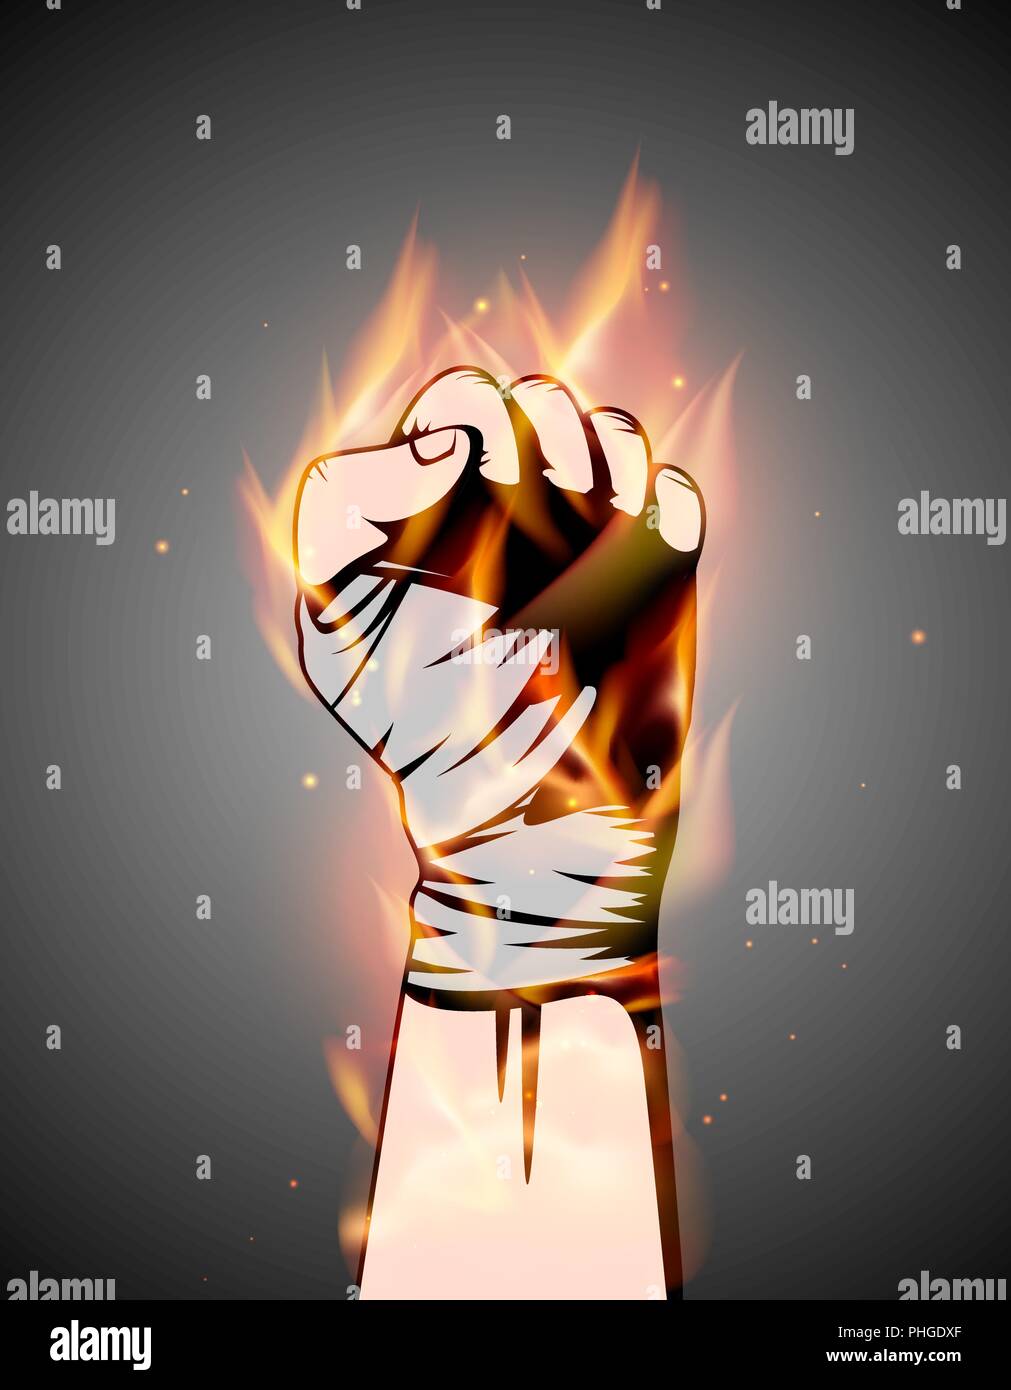 MMA or boxing burning bandage fist uplifted hand. Mixed martial arts fighting flame emblem or logo idea. Vector athletic symbol with fire. Stock Vector